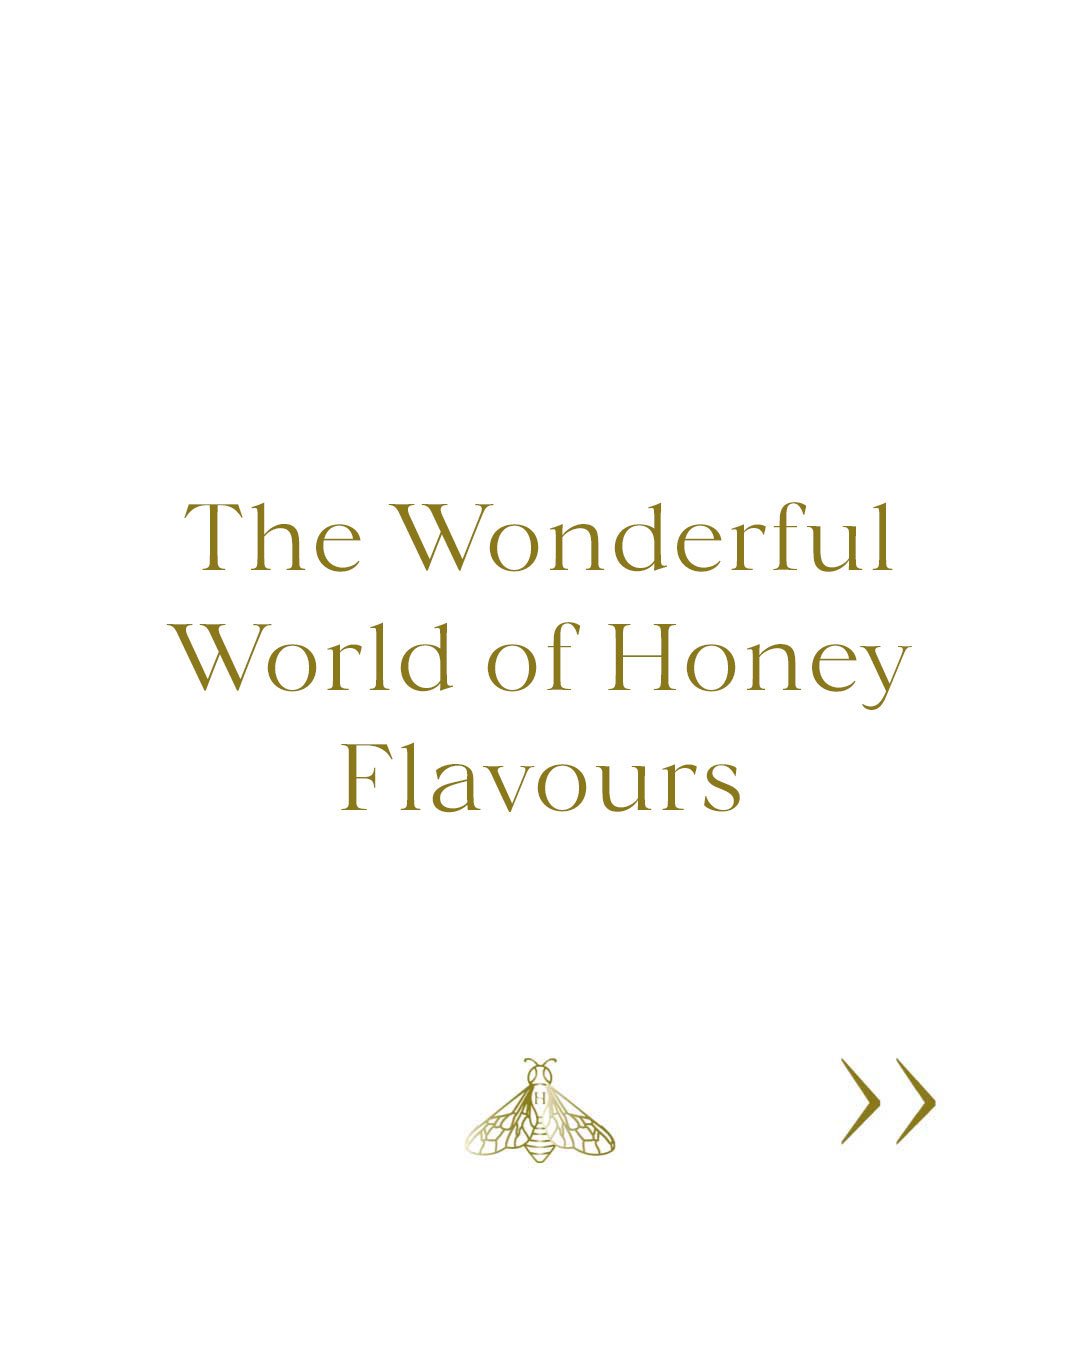 🌼🐝 Find your honey profile: come try different kinds of honey with us, pair them with delicious cheeses, tea and scones. Or, do what professional tasters do and try some all by itself spooned out of the jar!⁠
⁠
🍯 At Hive Restaurant, you can even t